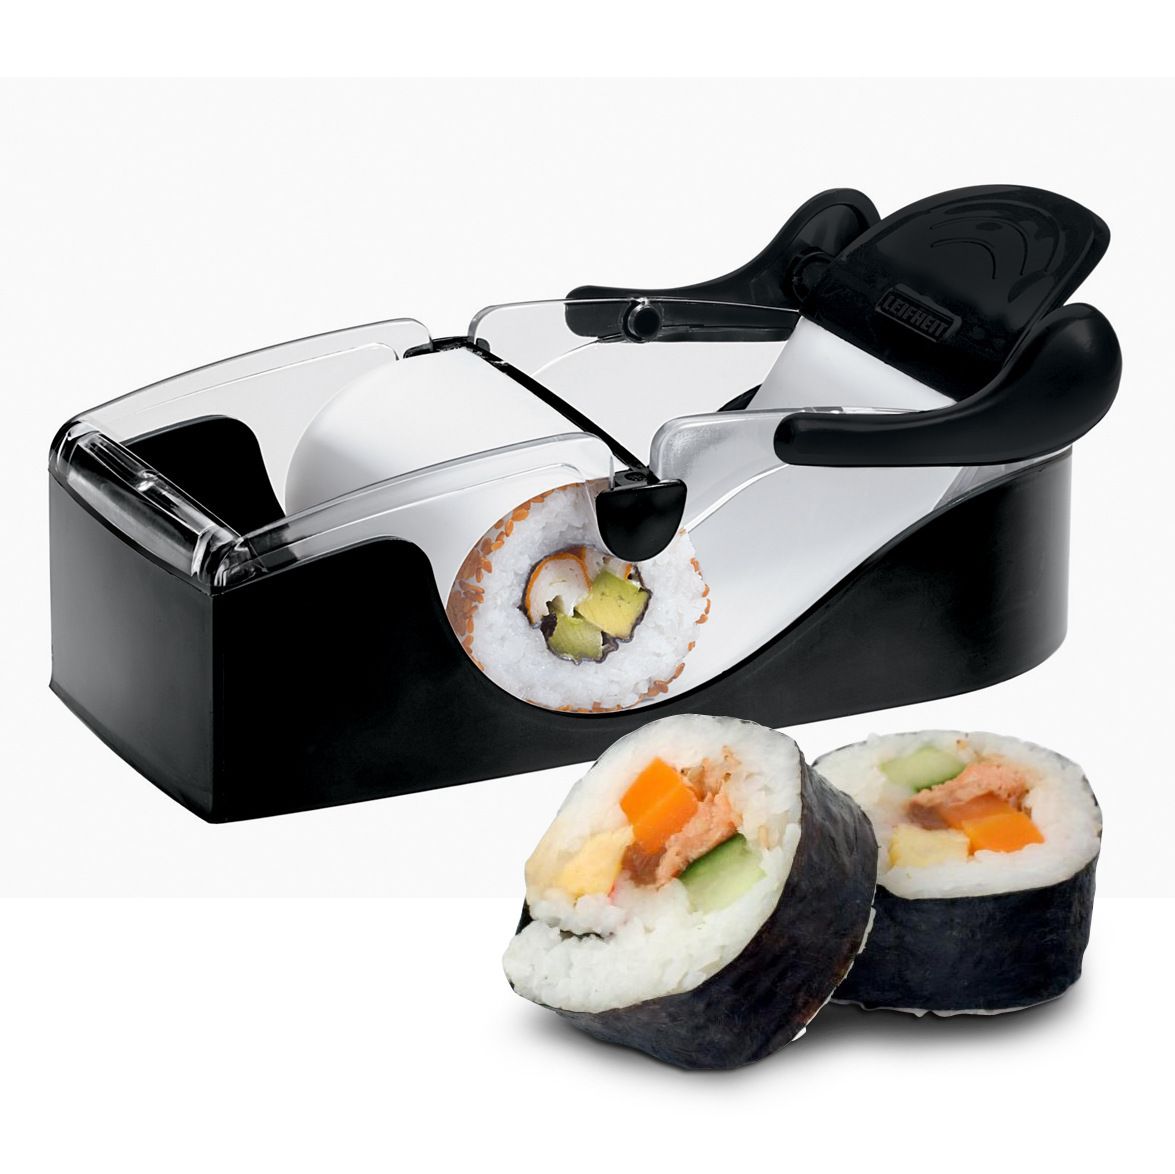 Wholesales DIY Mold Vegetable Meat Automatic Rolling Tool Magic Easy Making Machine Roller Sushi Maker